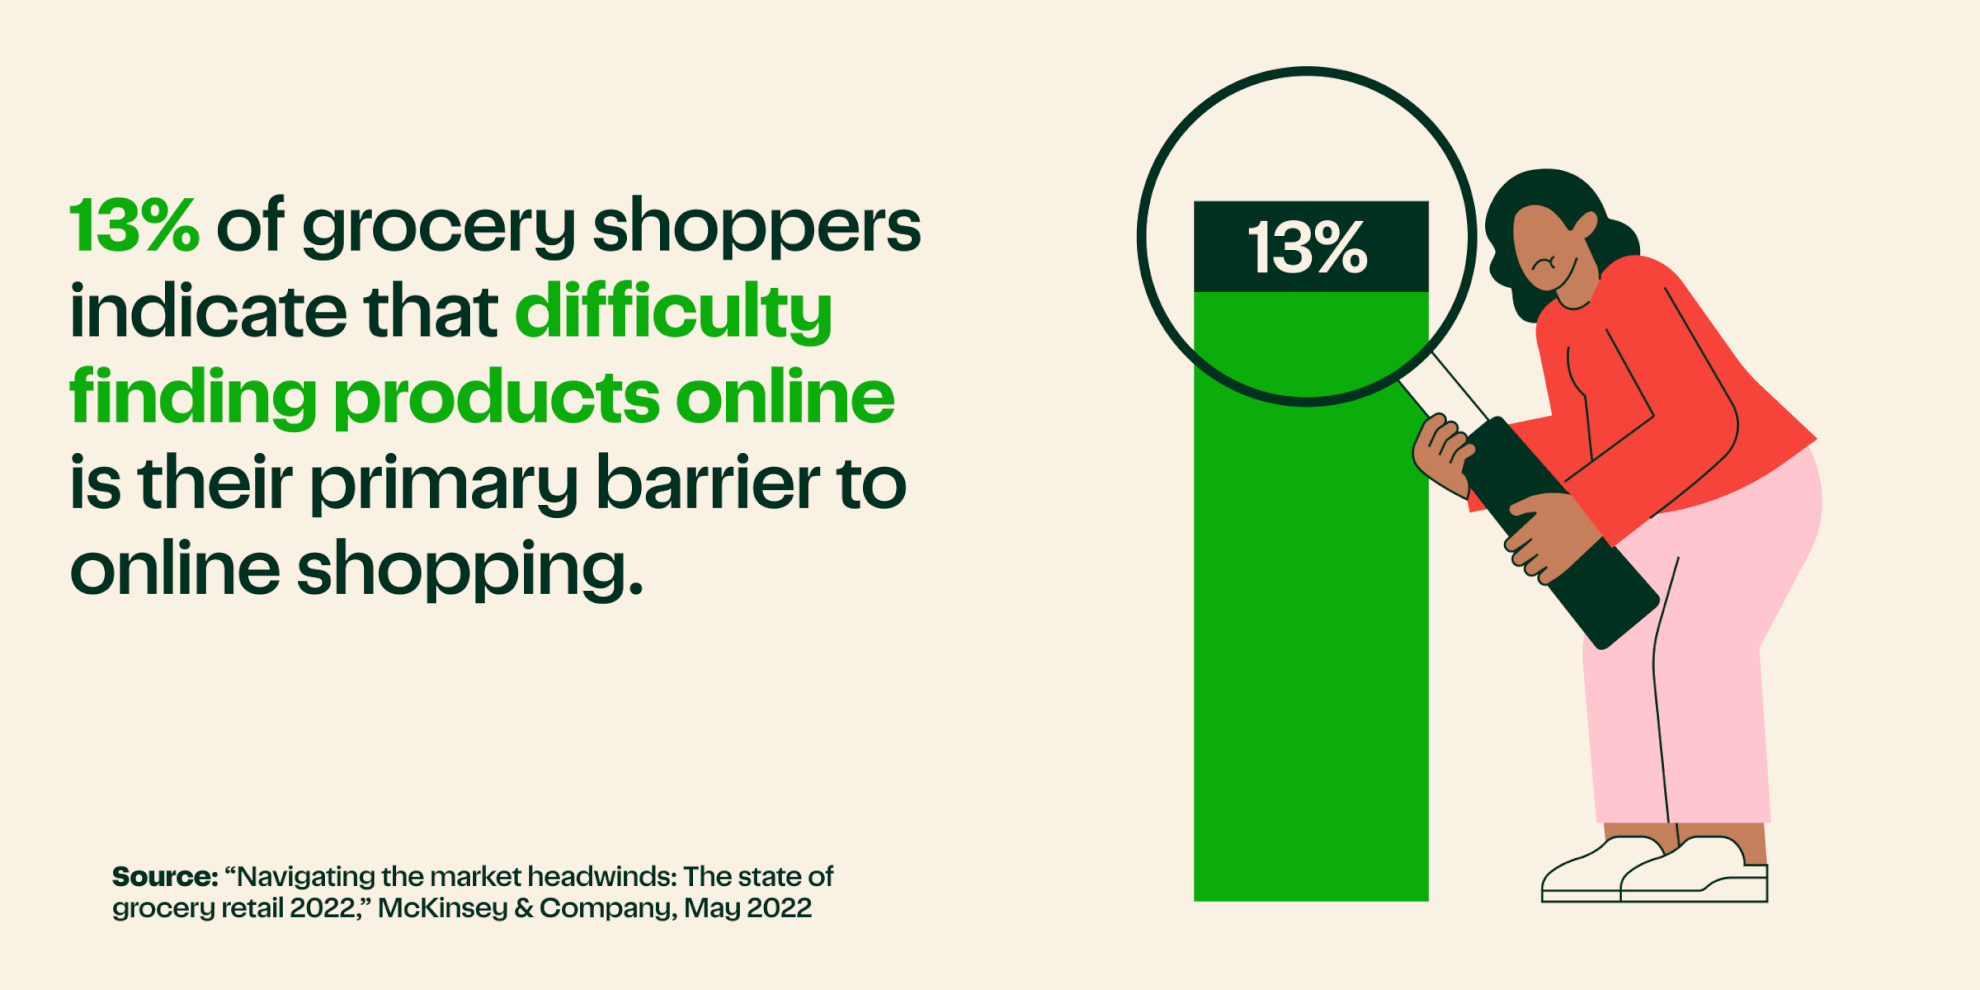 13% of grocery shoppers indicate that difficulty finding products online is their primary barrier to online shopping.